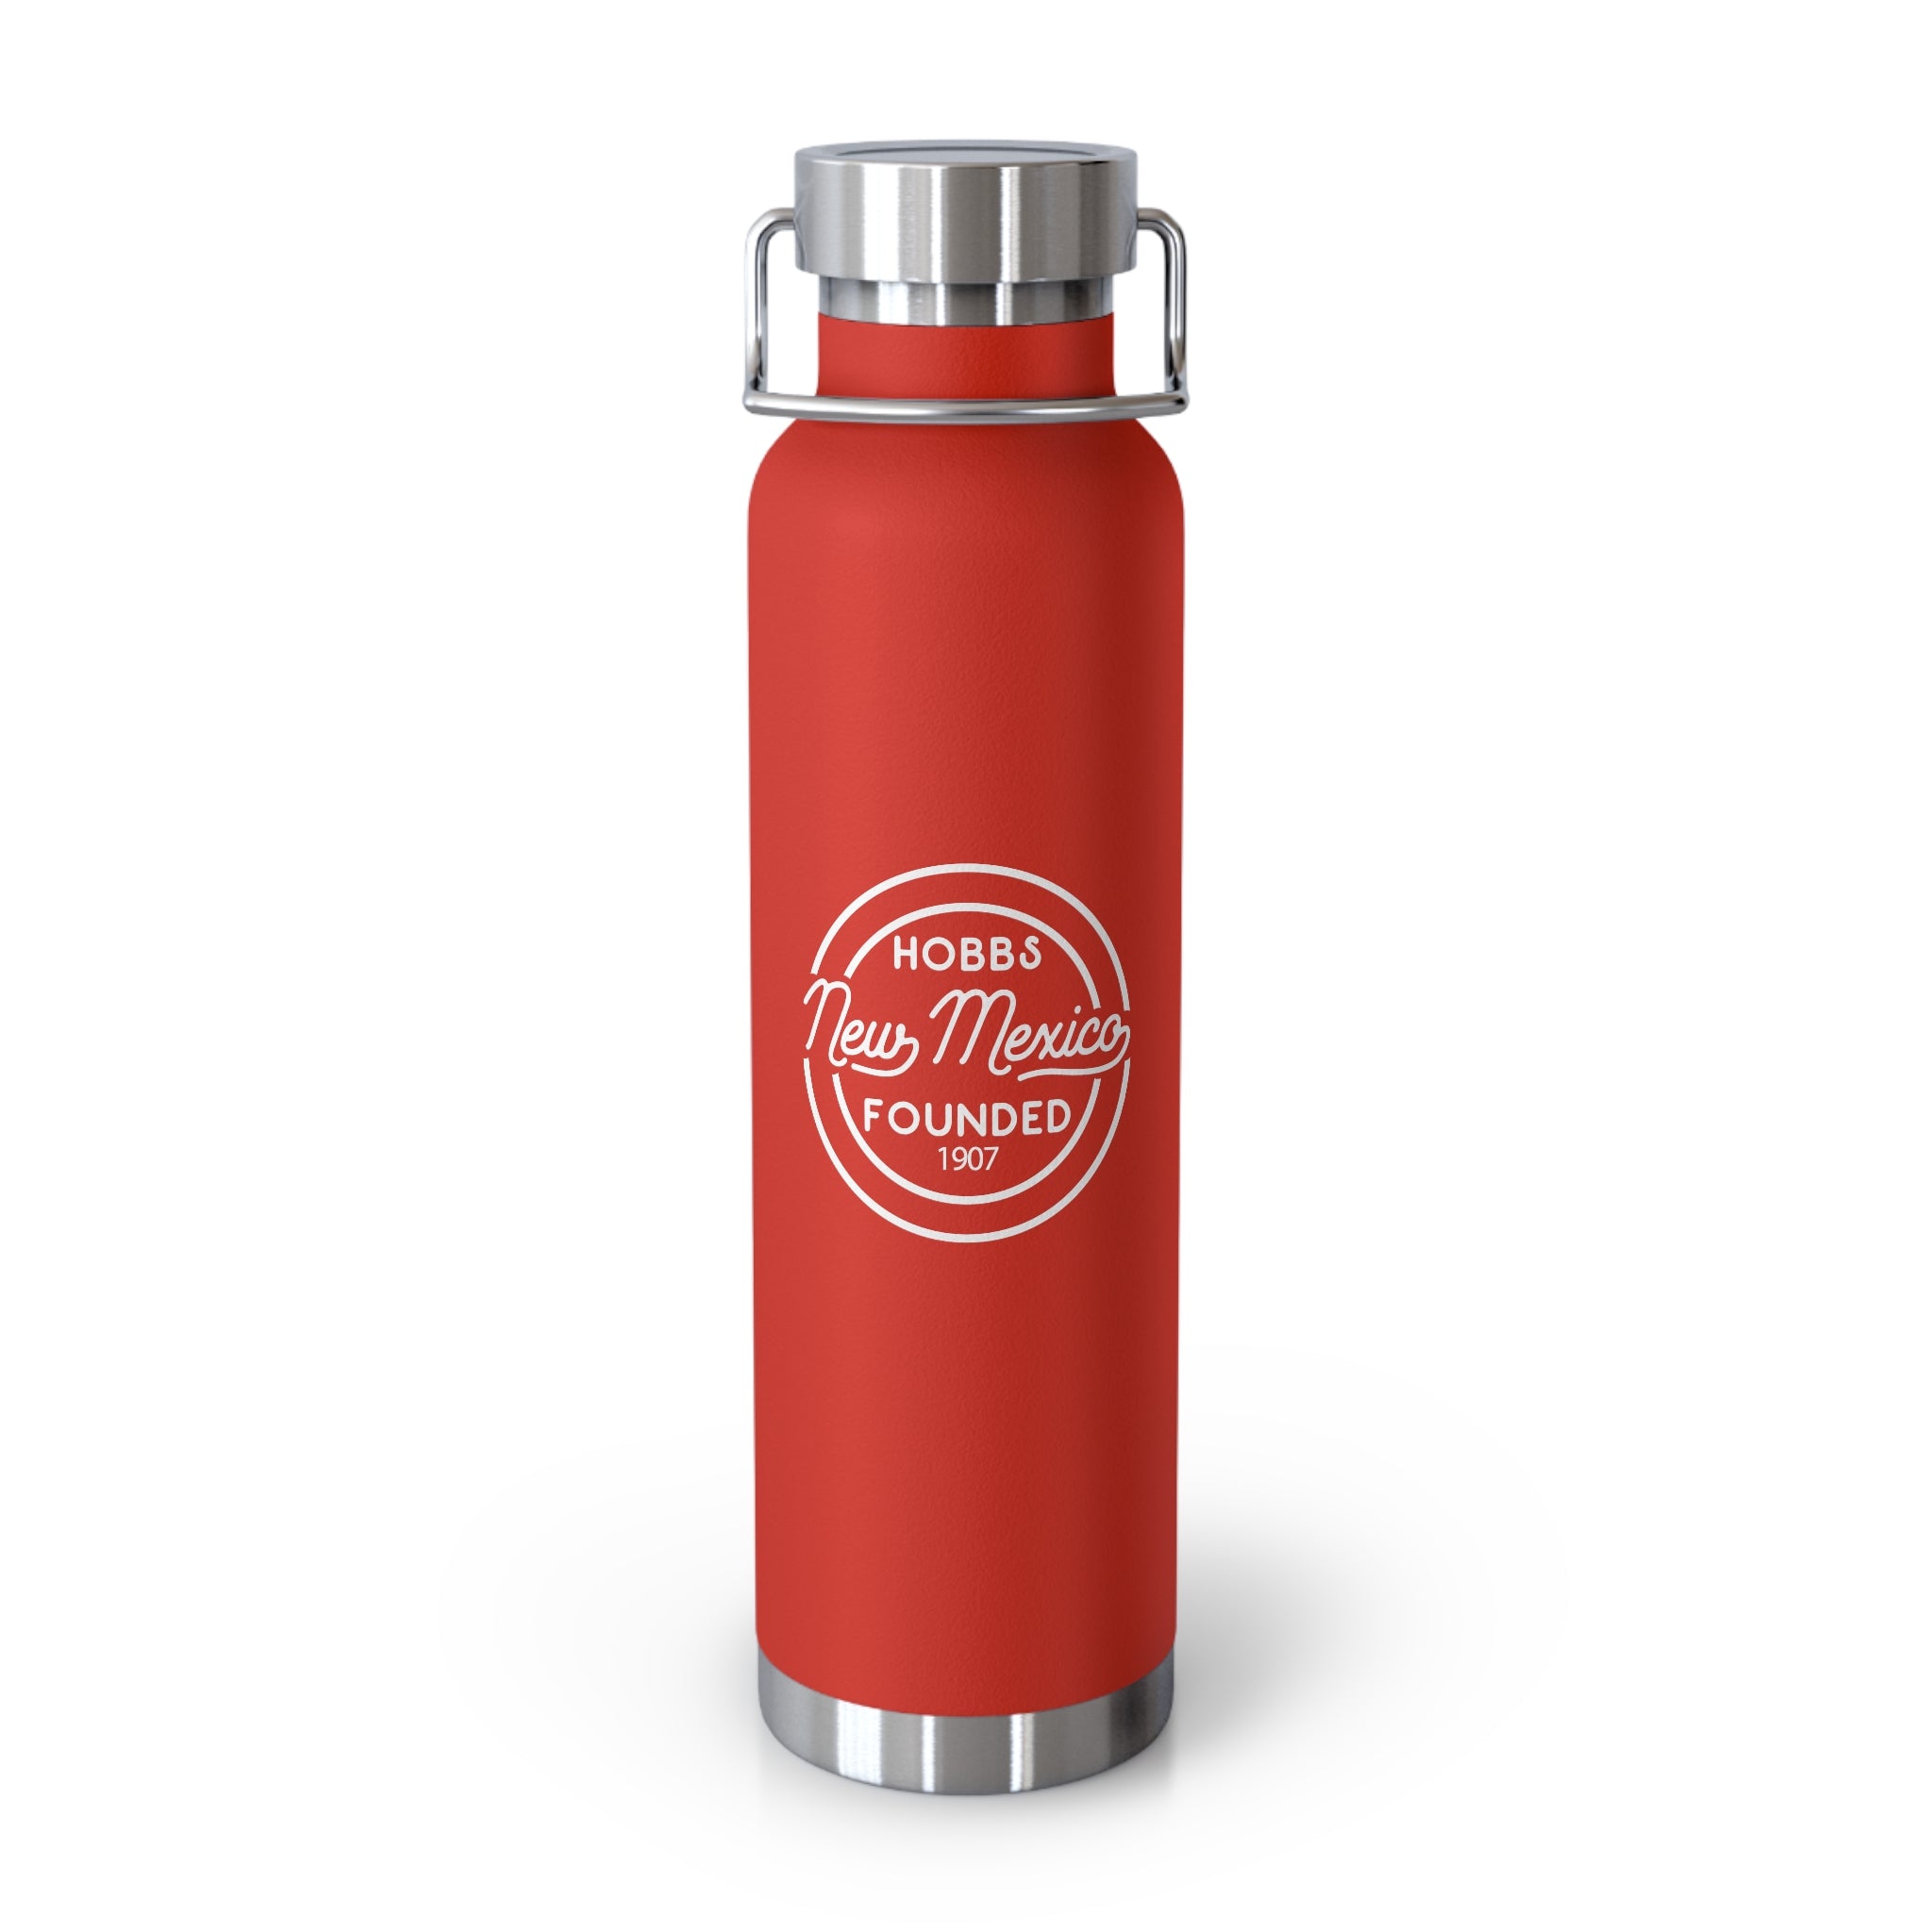 22oz Vacuum insulated tumbler for Hobbs, New Mexico in Red